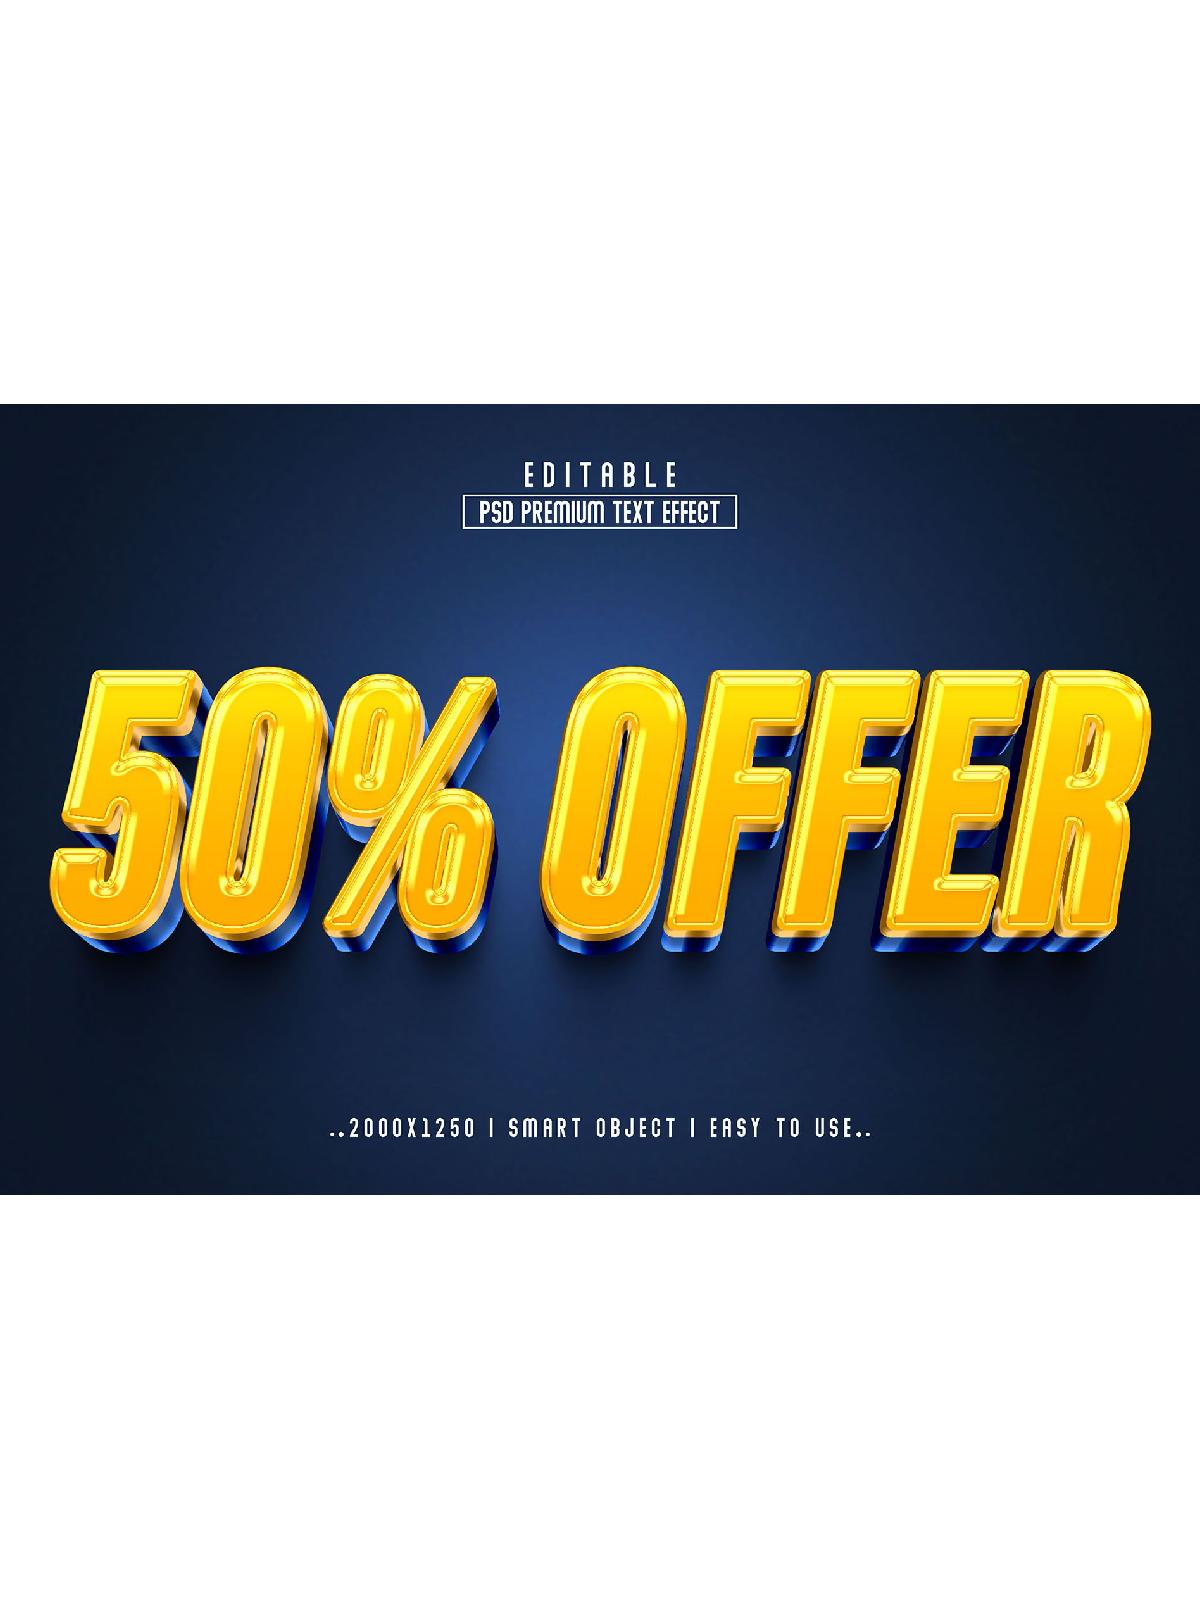 Blue and yellow banner with the words 50 % off.